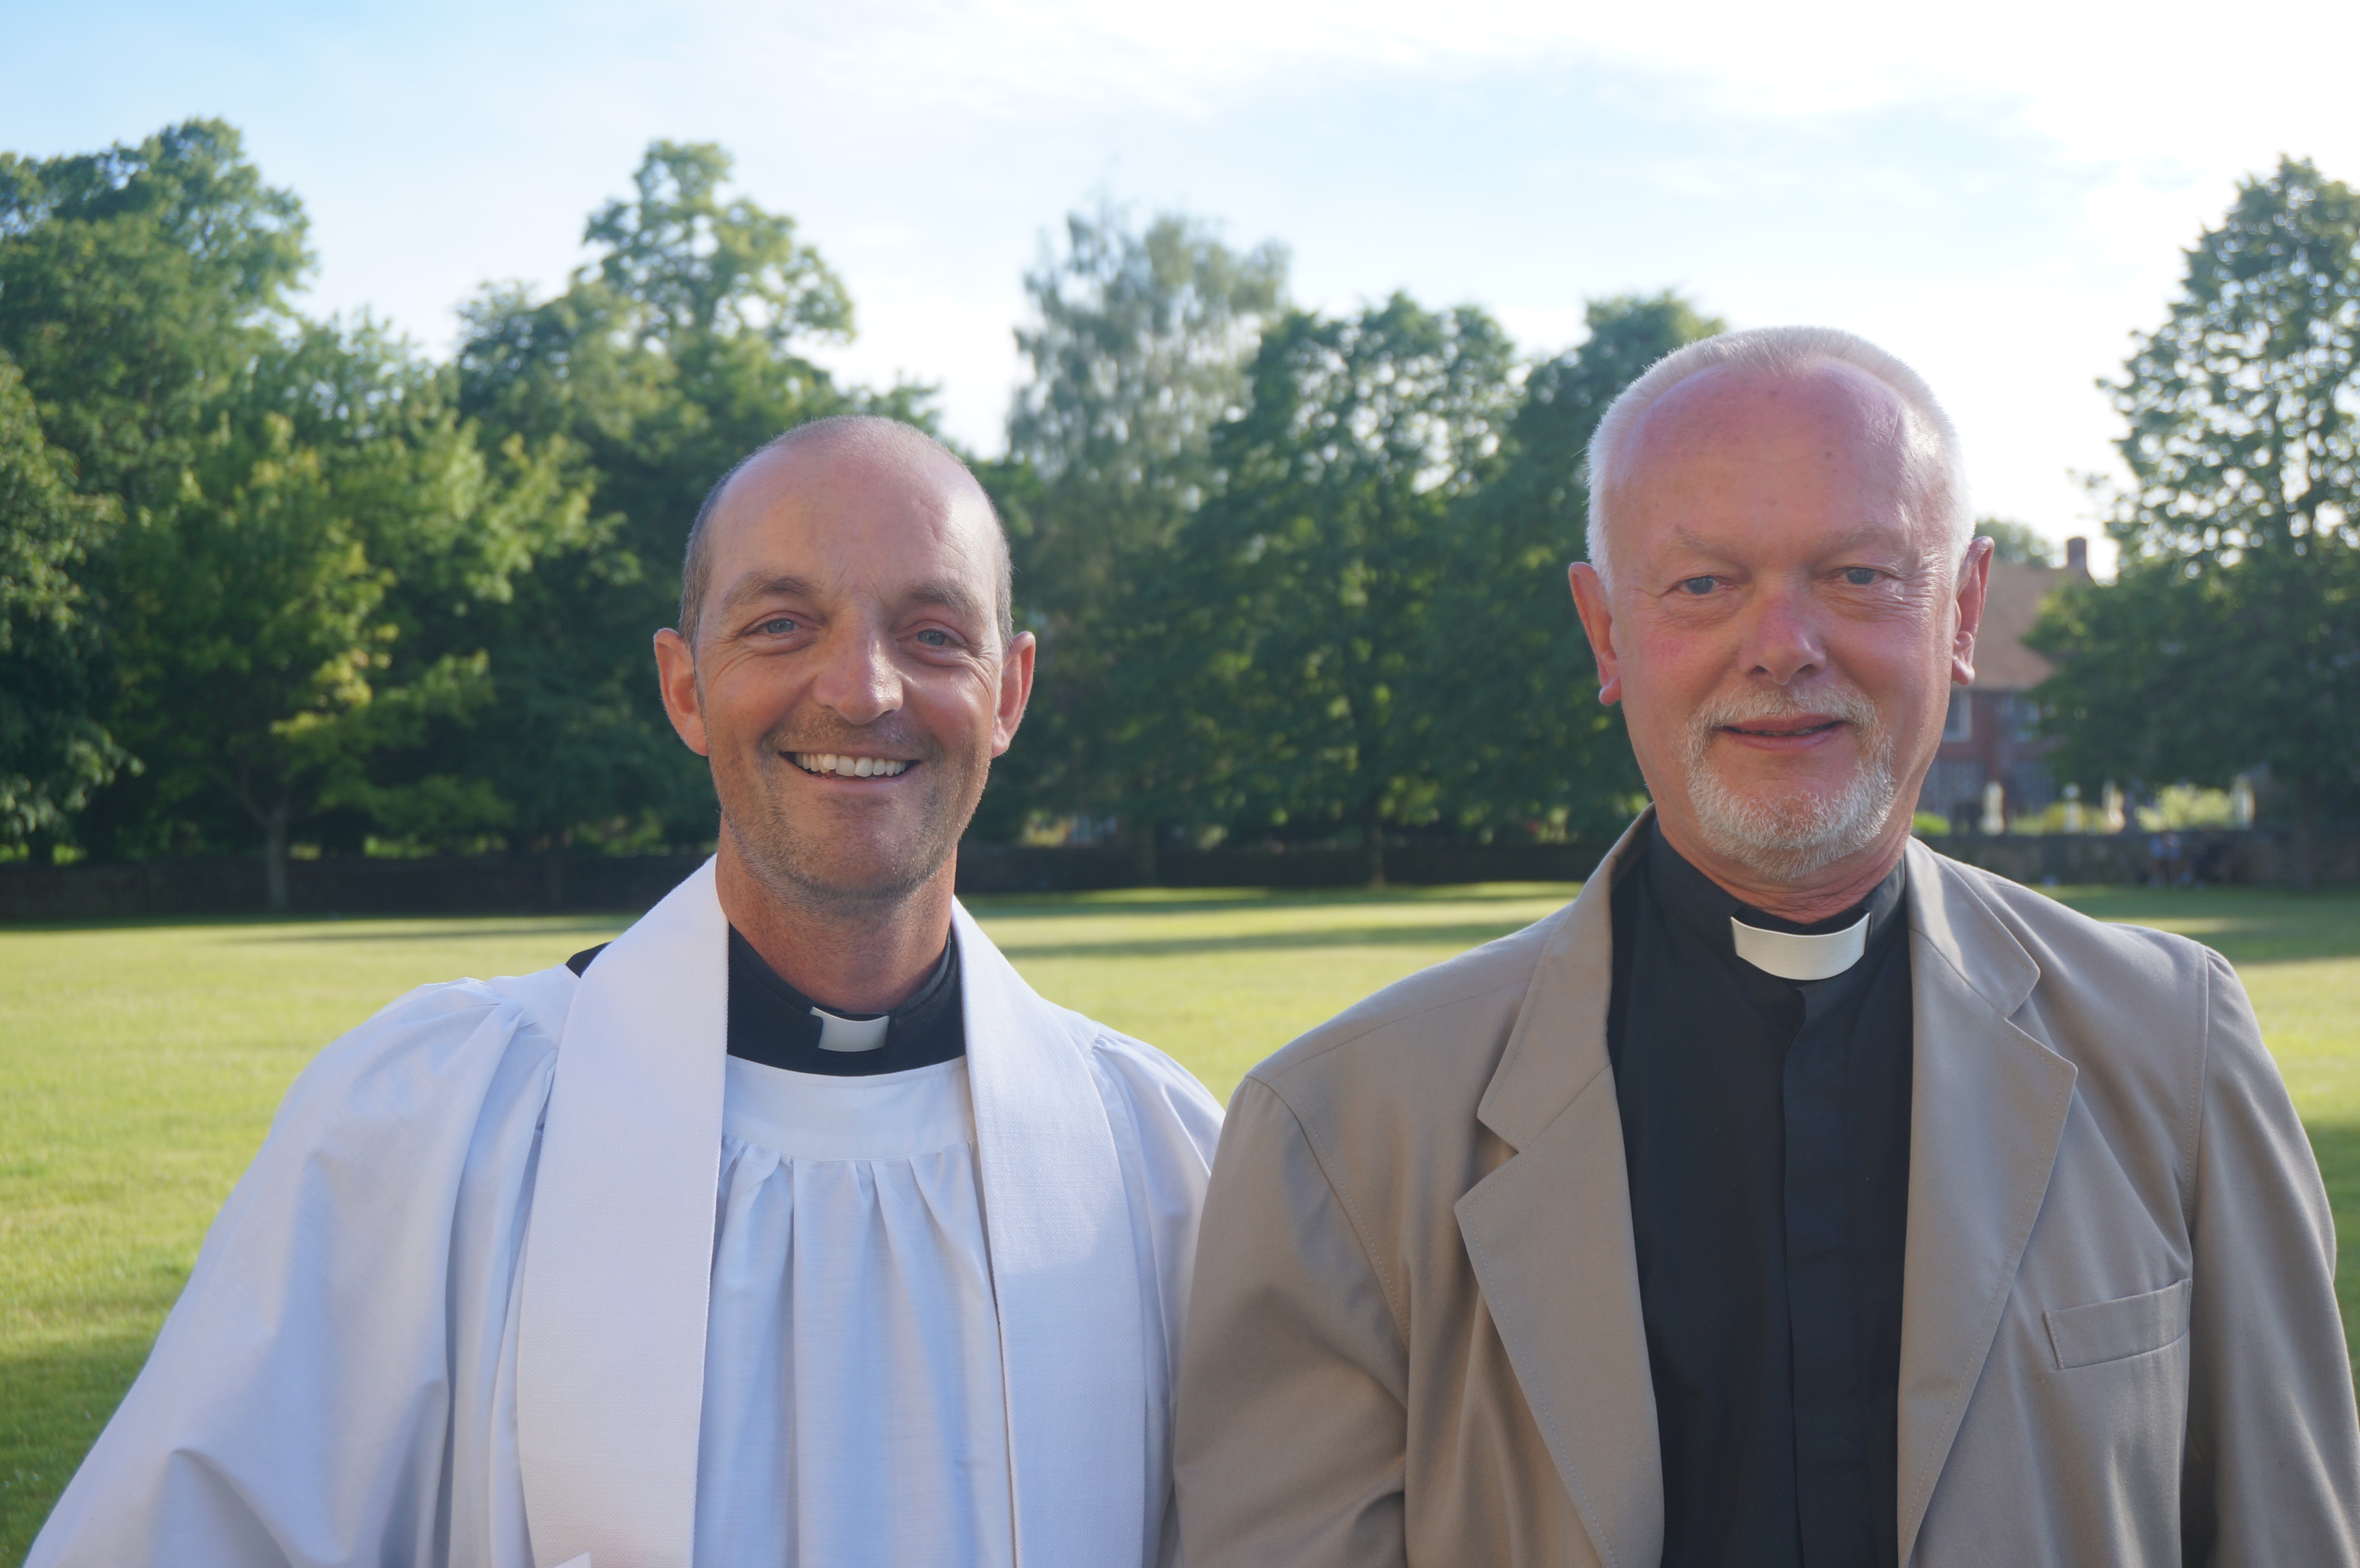 The Reverend Nick Webb with training incumbent the Reverend James Mercer after the Ordination of Priests on Saturday 26th June 2021